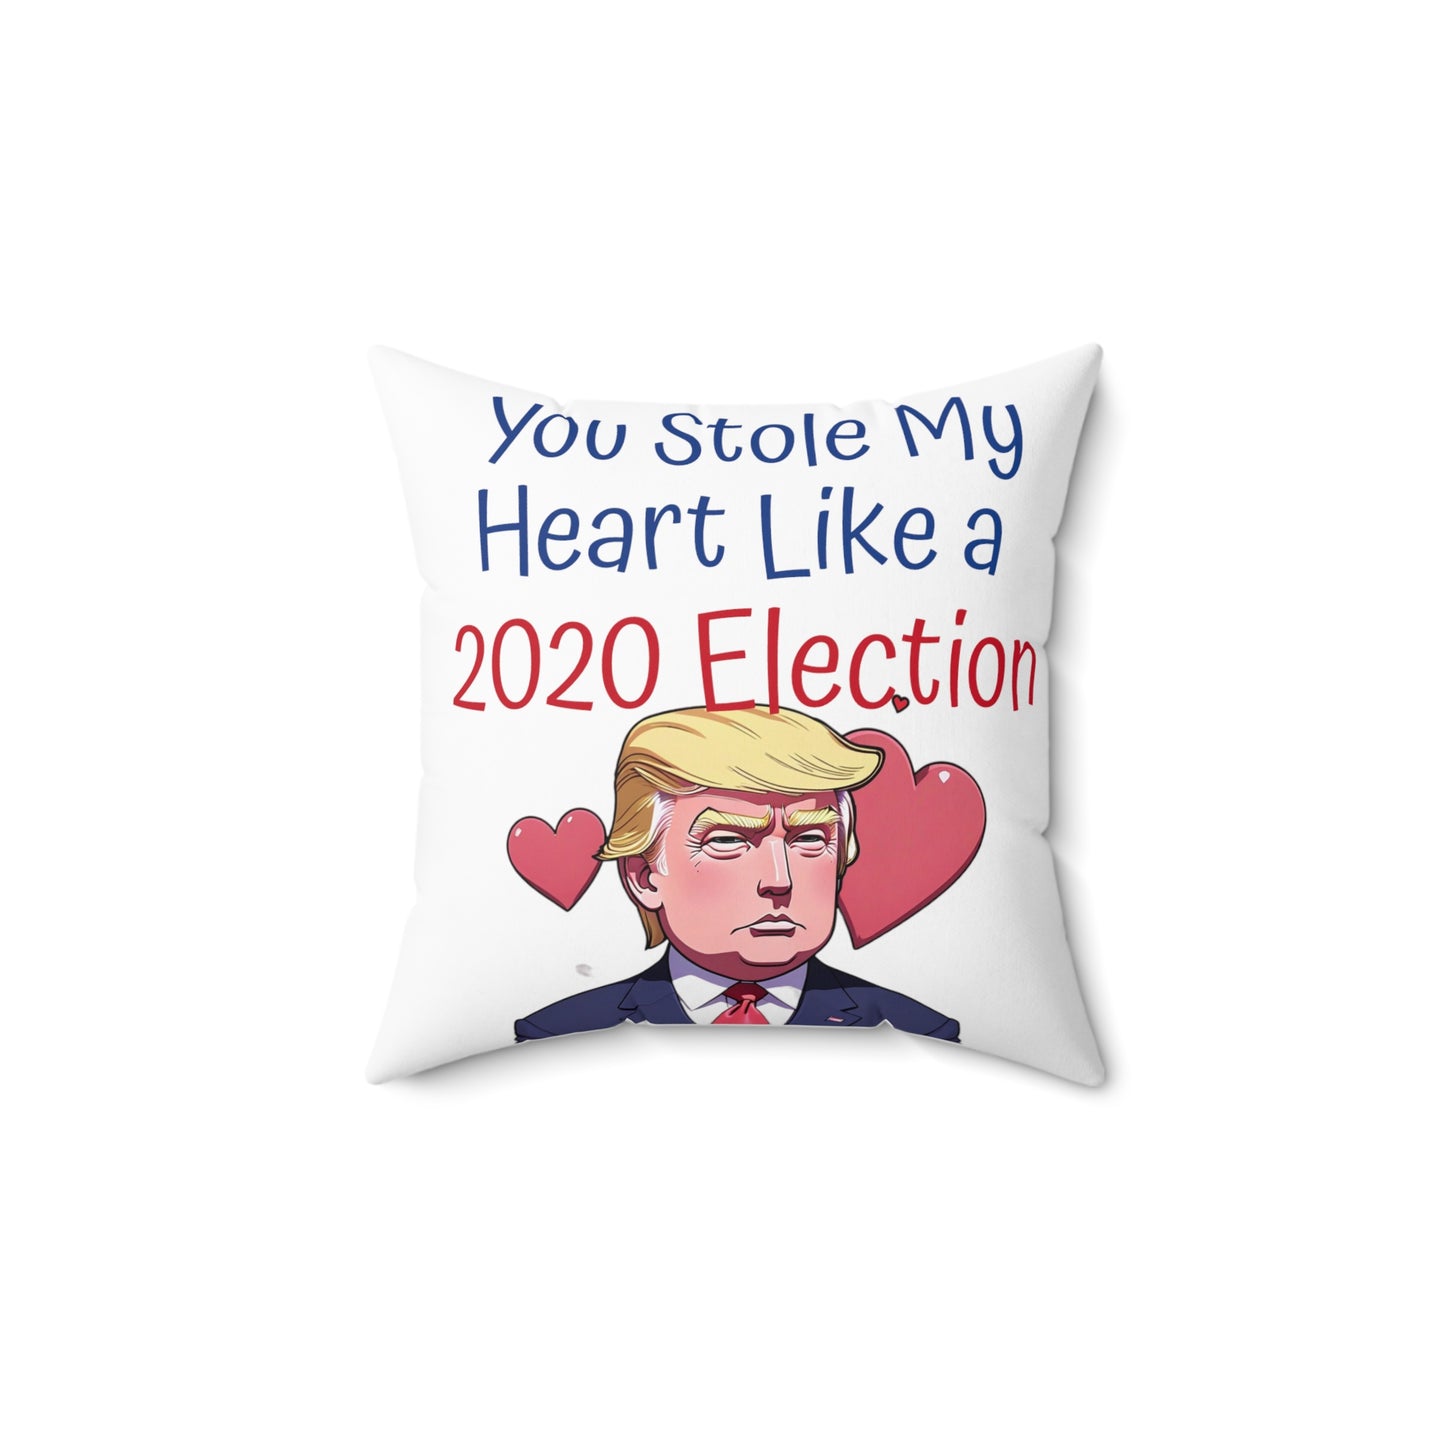 You Stole My Heart Like a 2020 Election Spun Polyester Square Pillow Trump